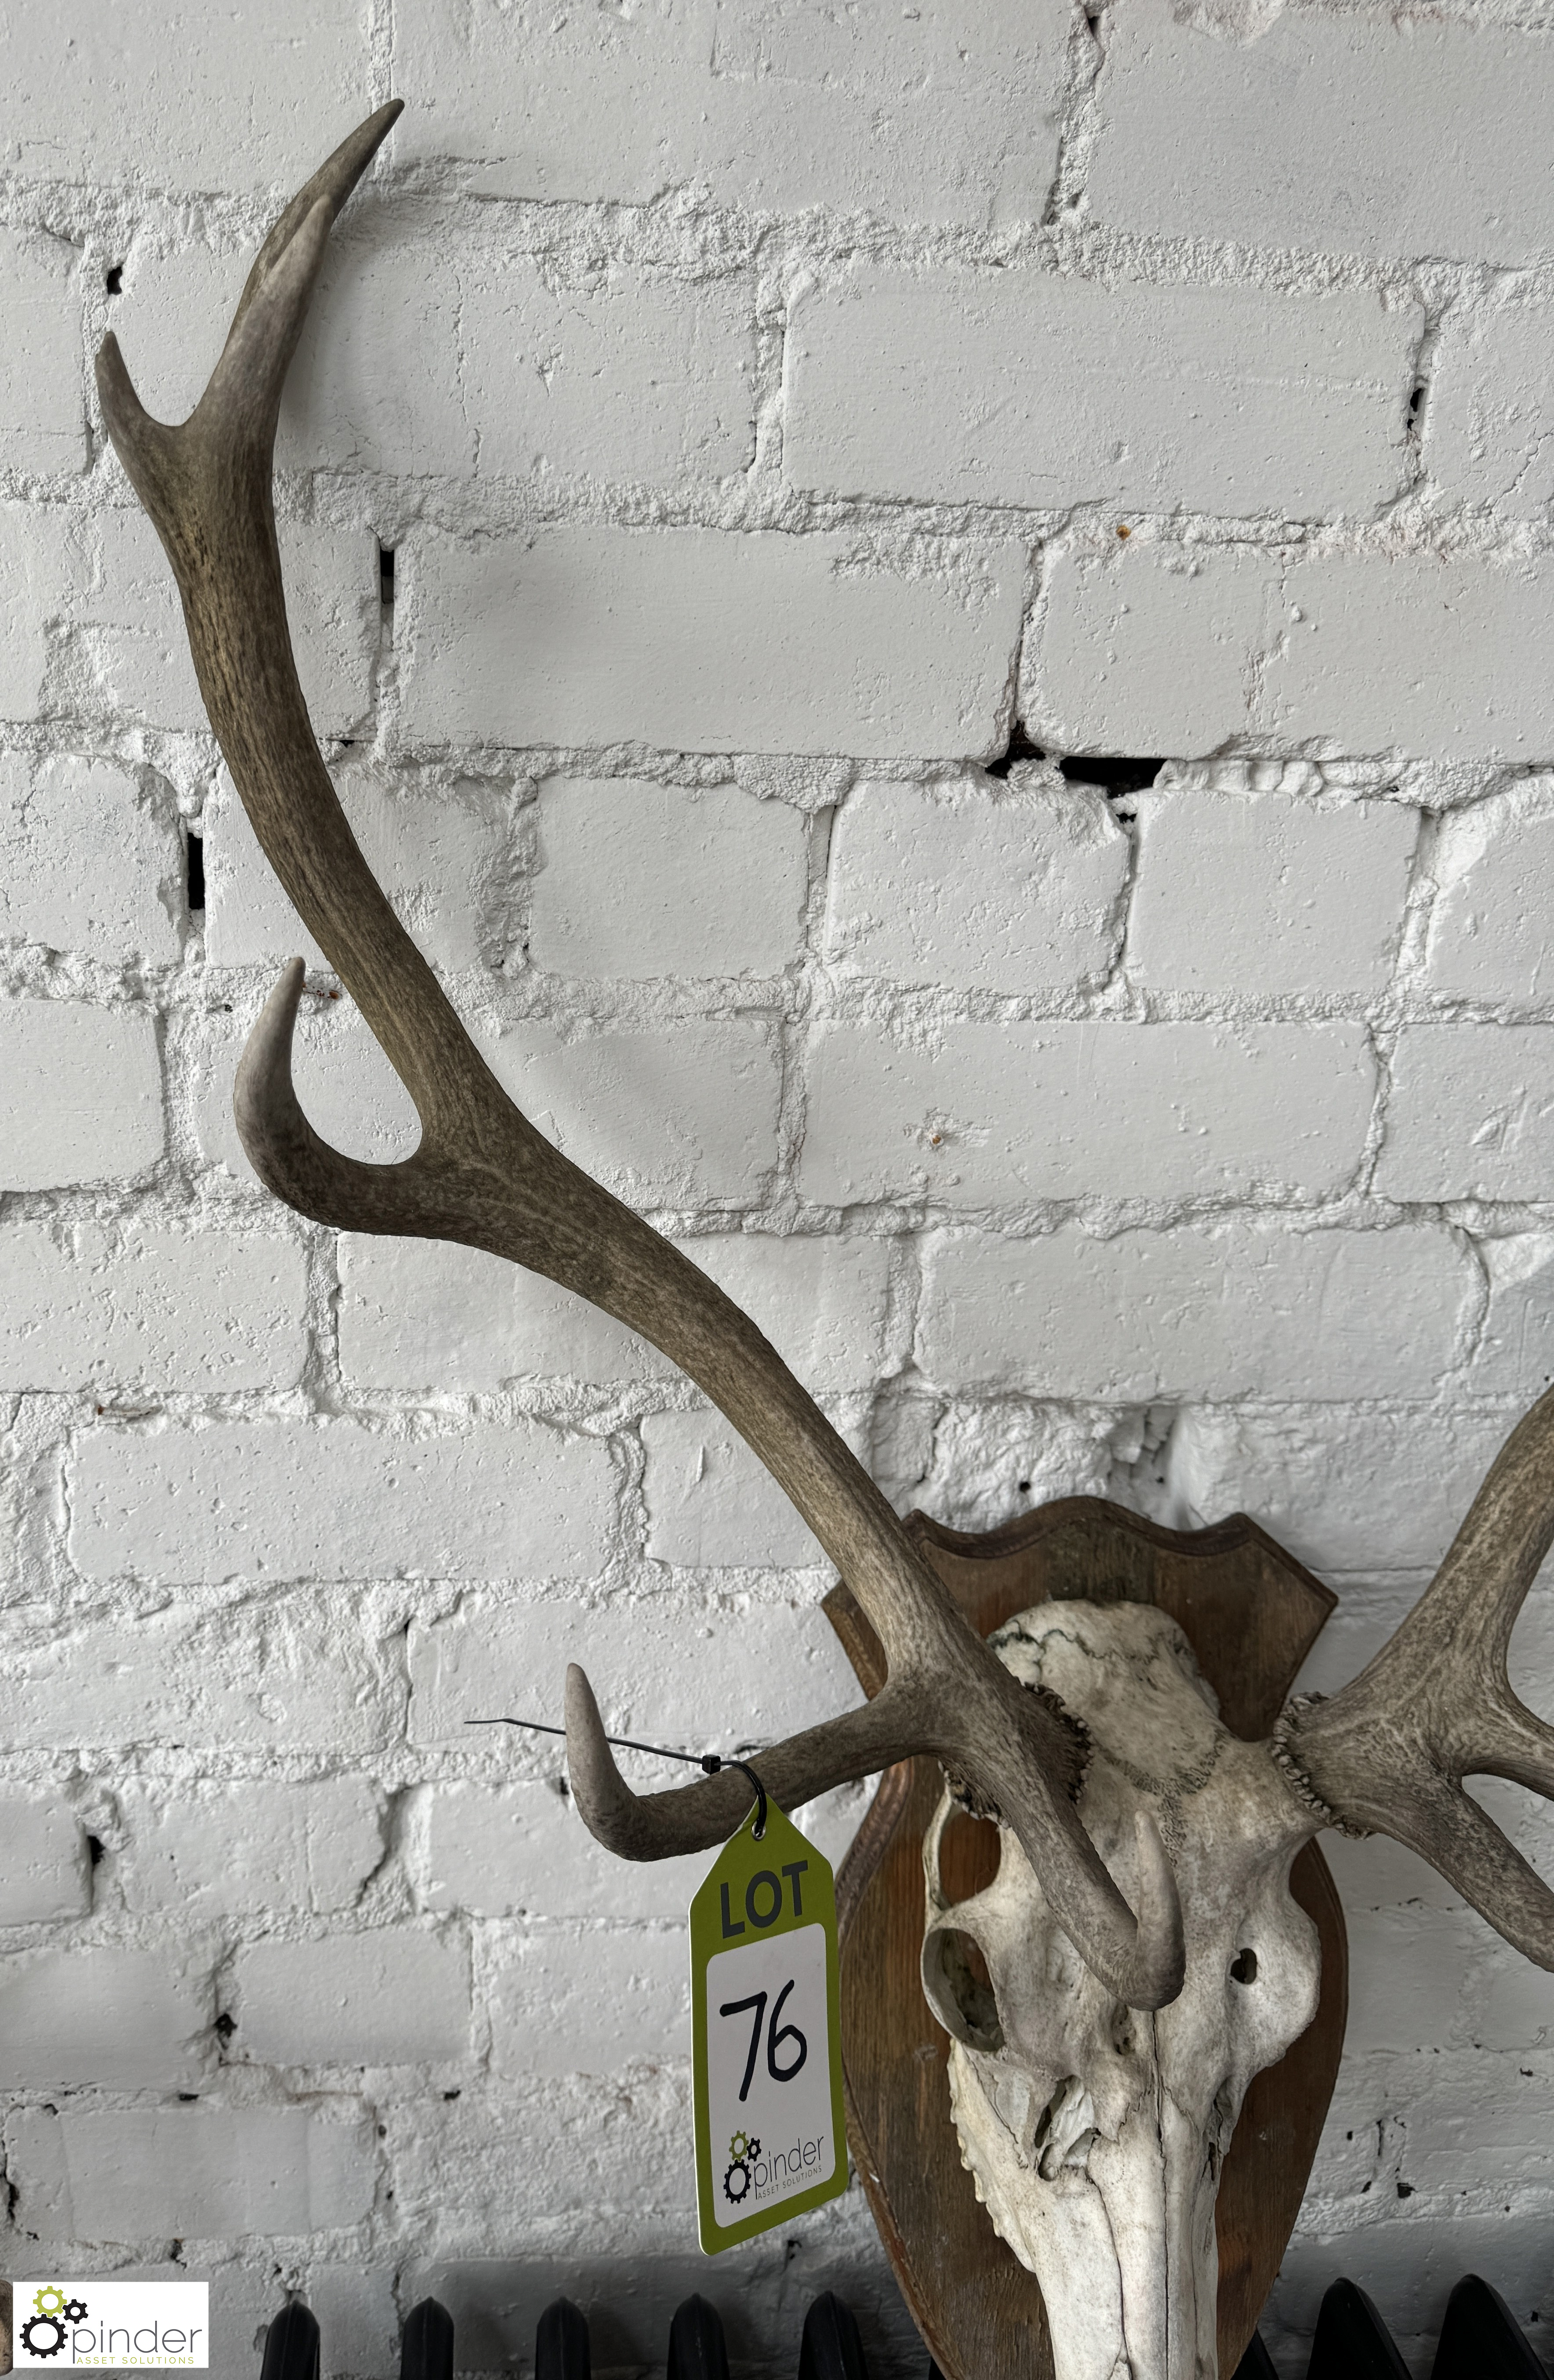 Deer Skull and Antlers mounted on shield - Image 5 of 6